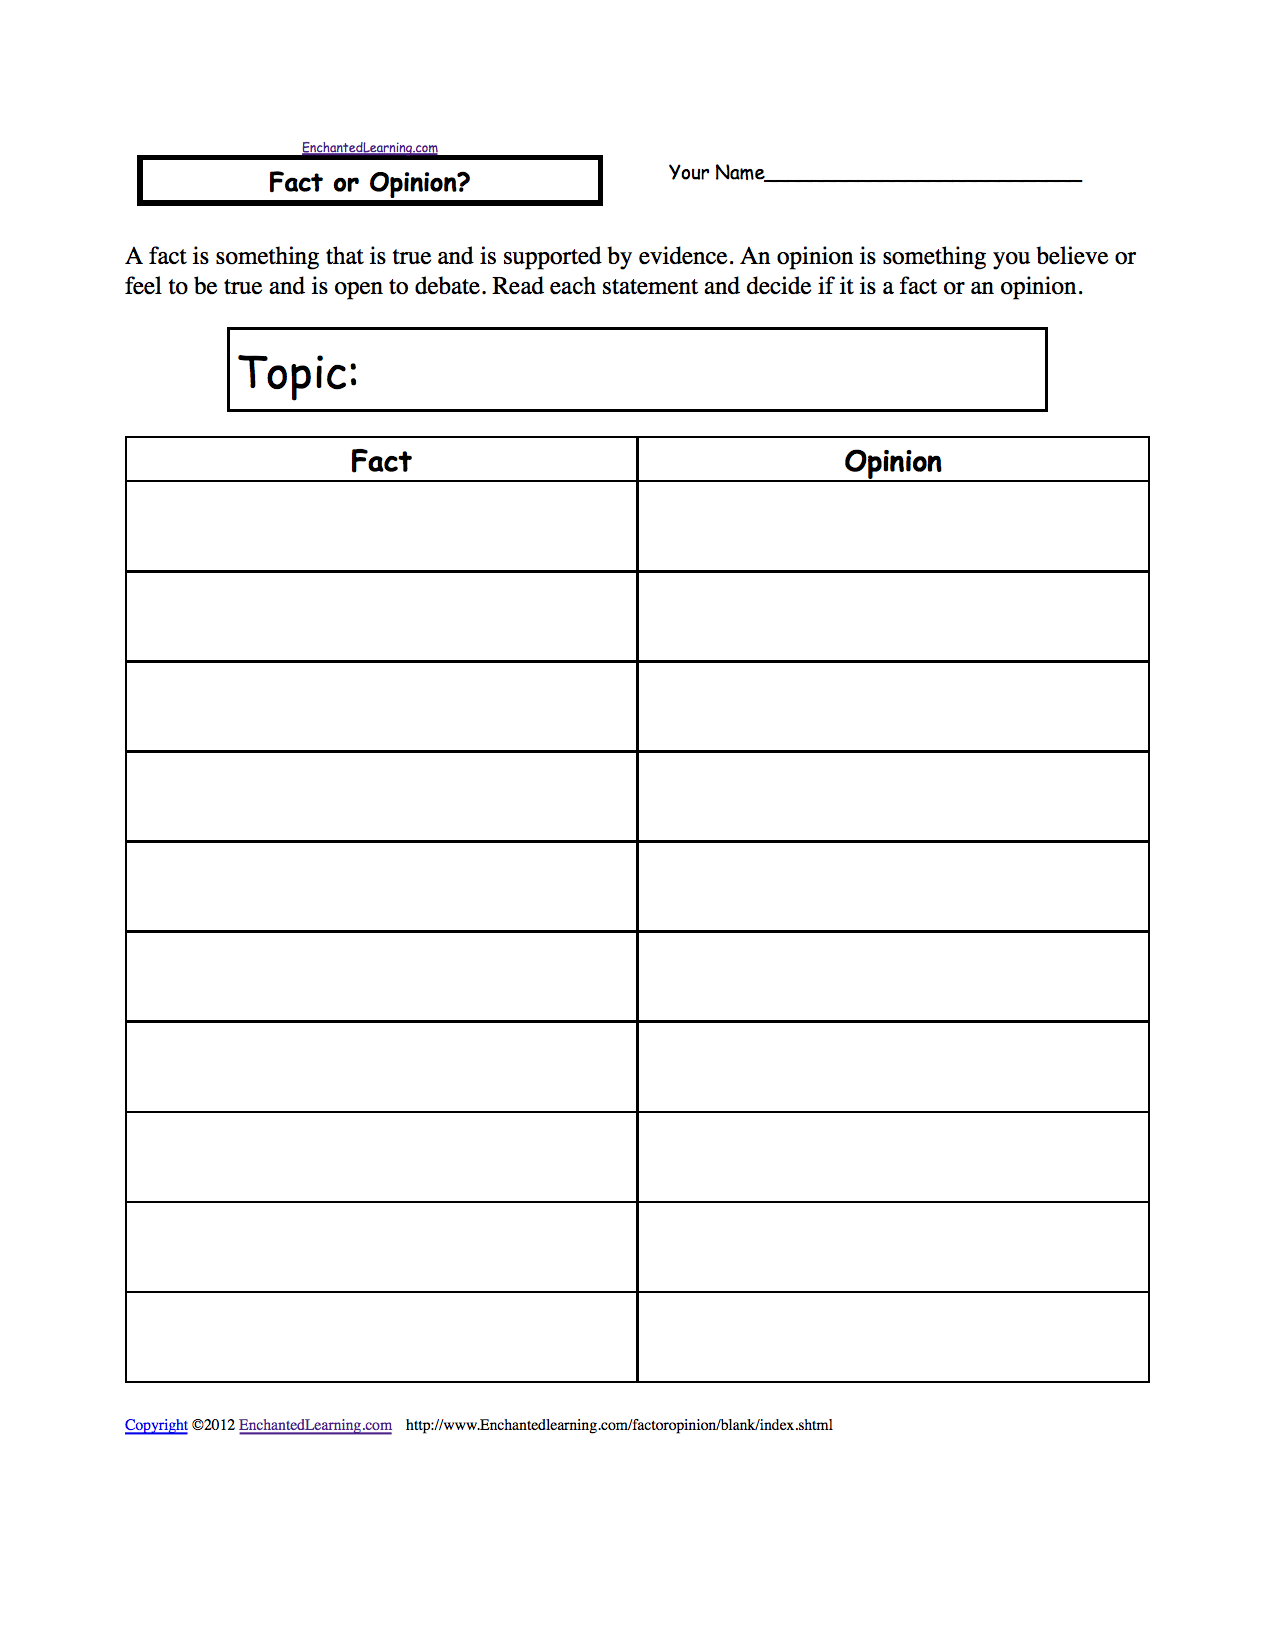 fact-or-opinion-worksheets-to-print-enchantedlearning